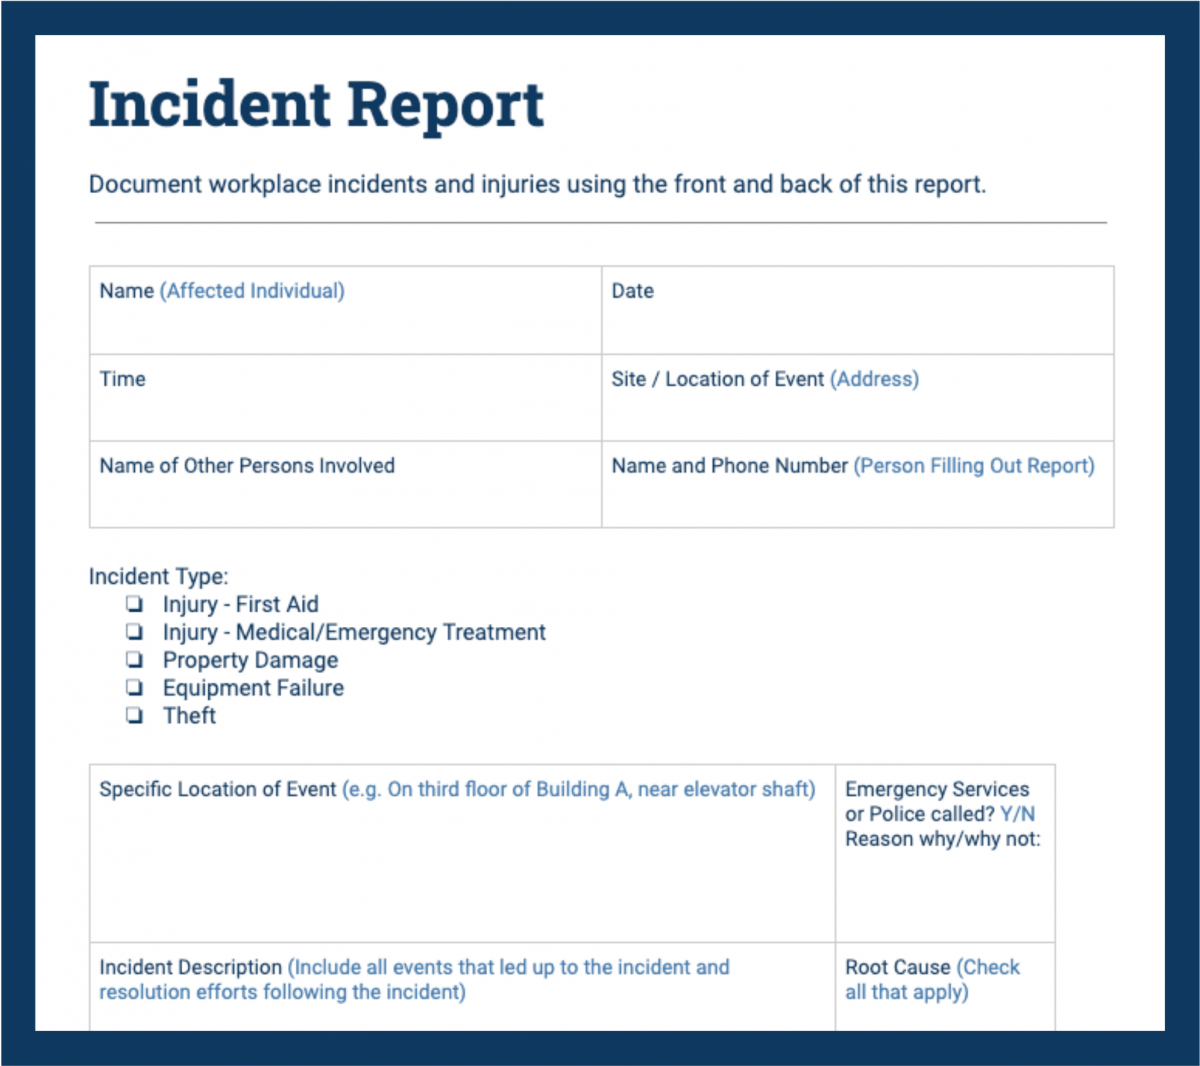 Incident Report Samples to Help You Describe Accidents - Safesite With Incident Report Log Template